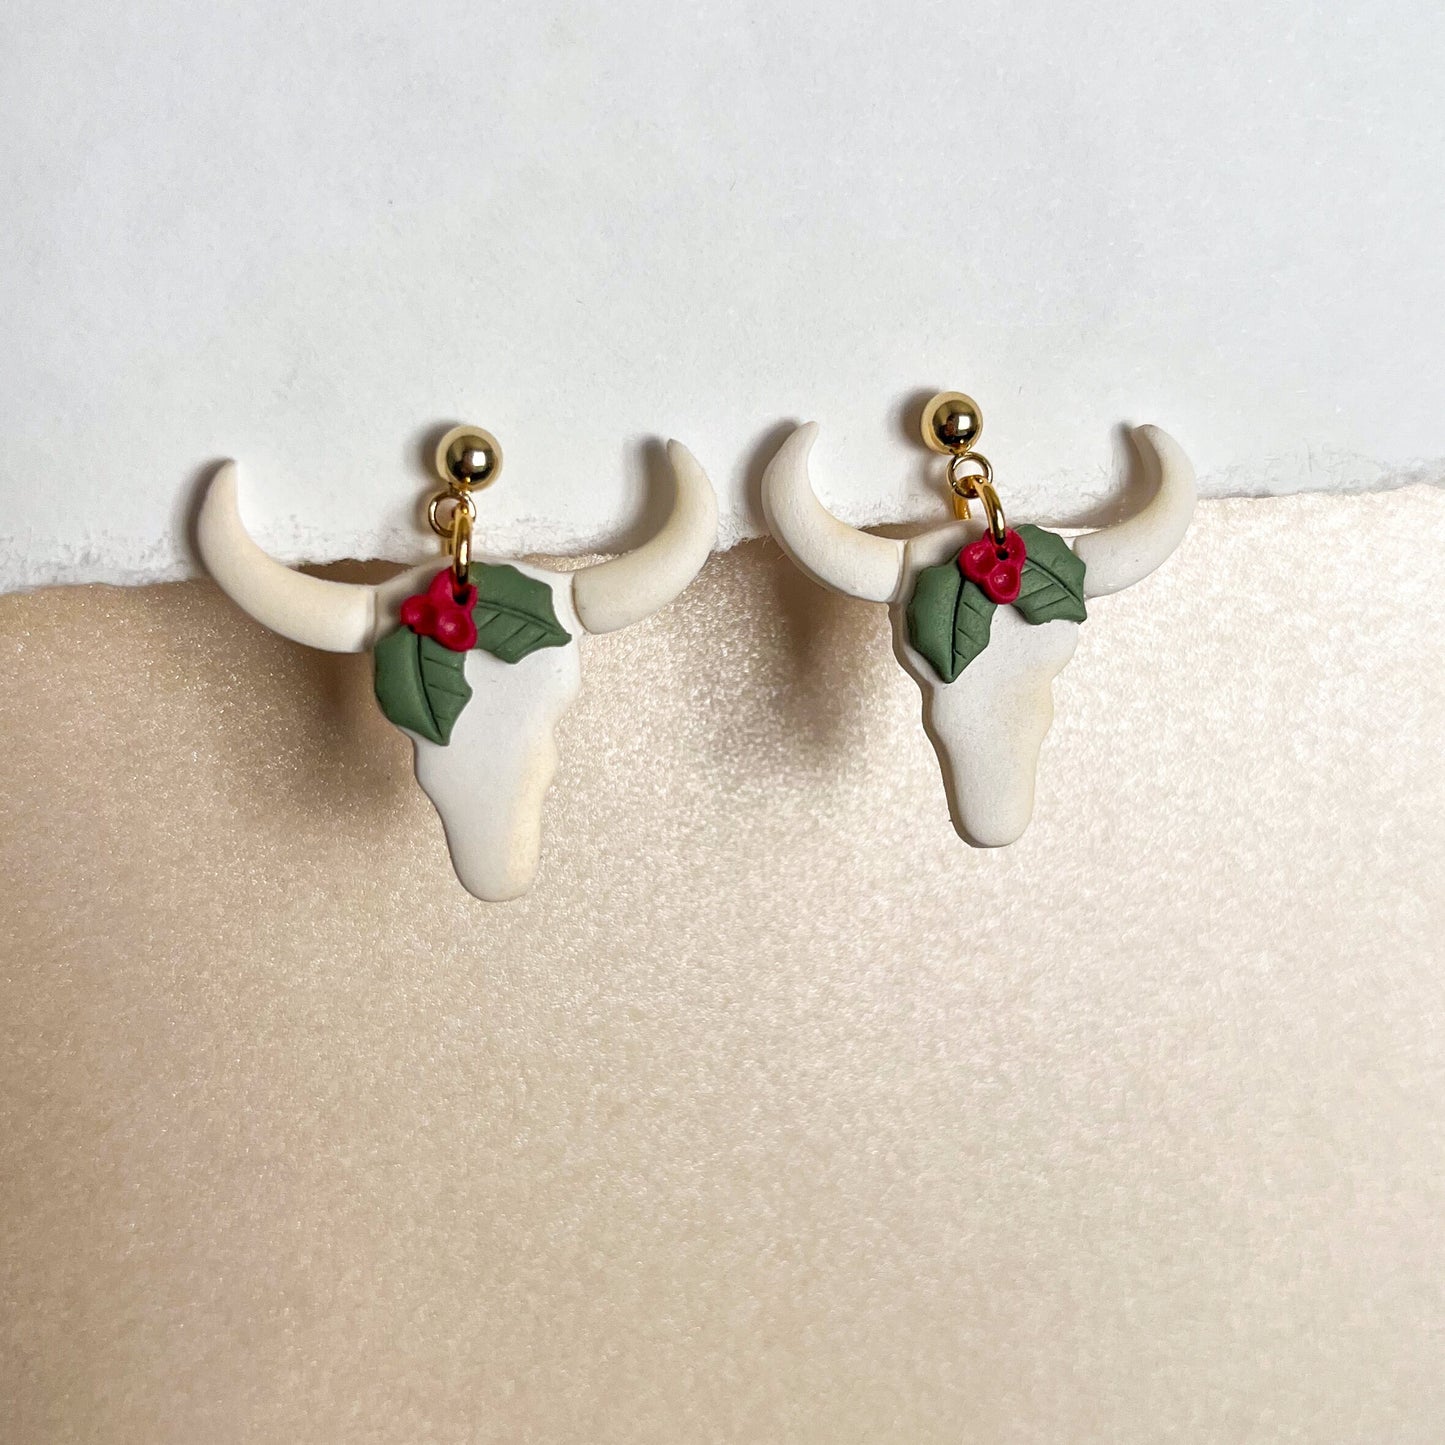 Cow skulls with holly earrings| 24k gold plated